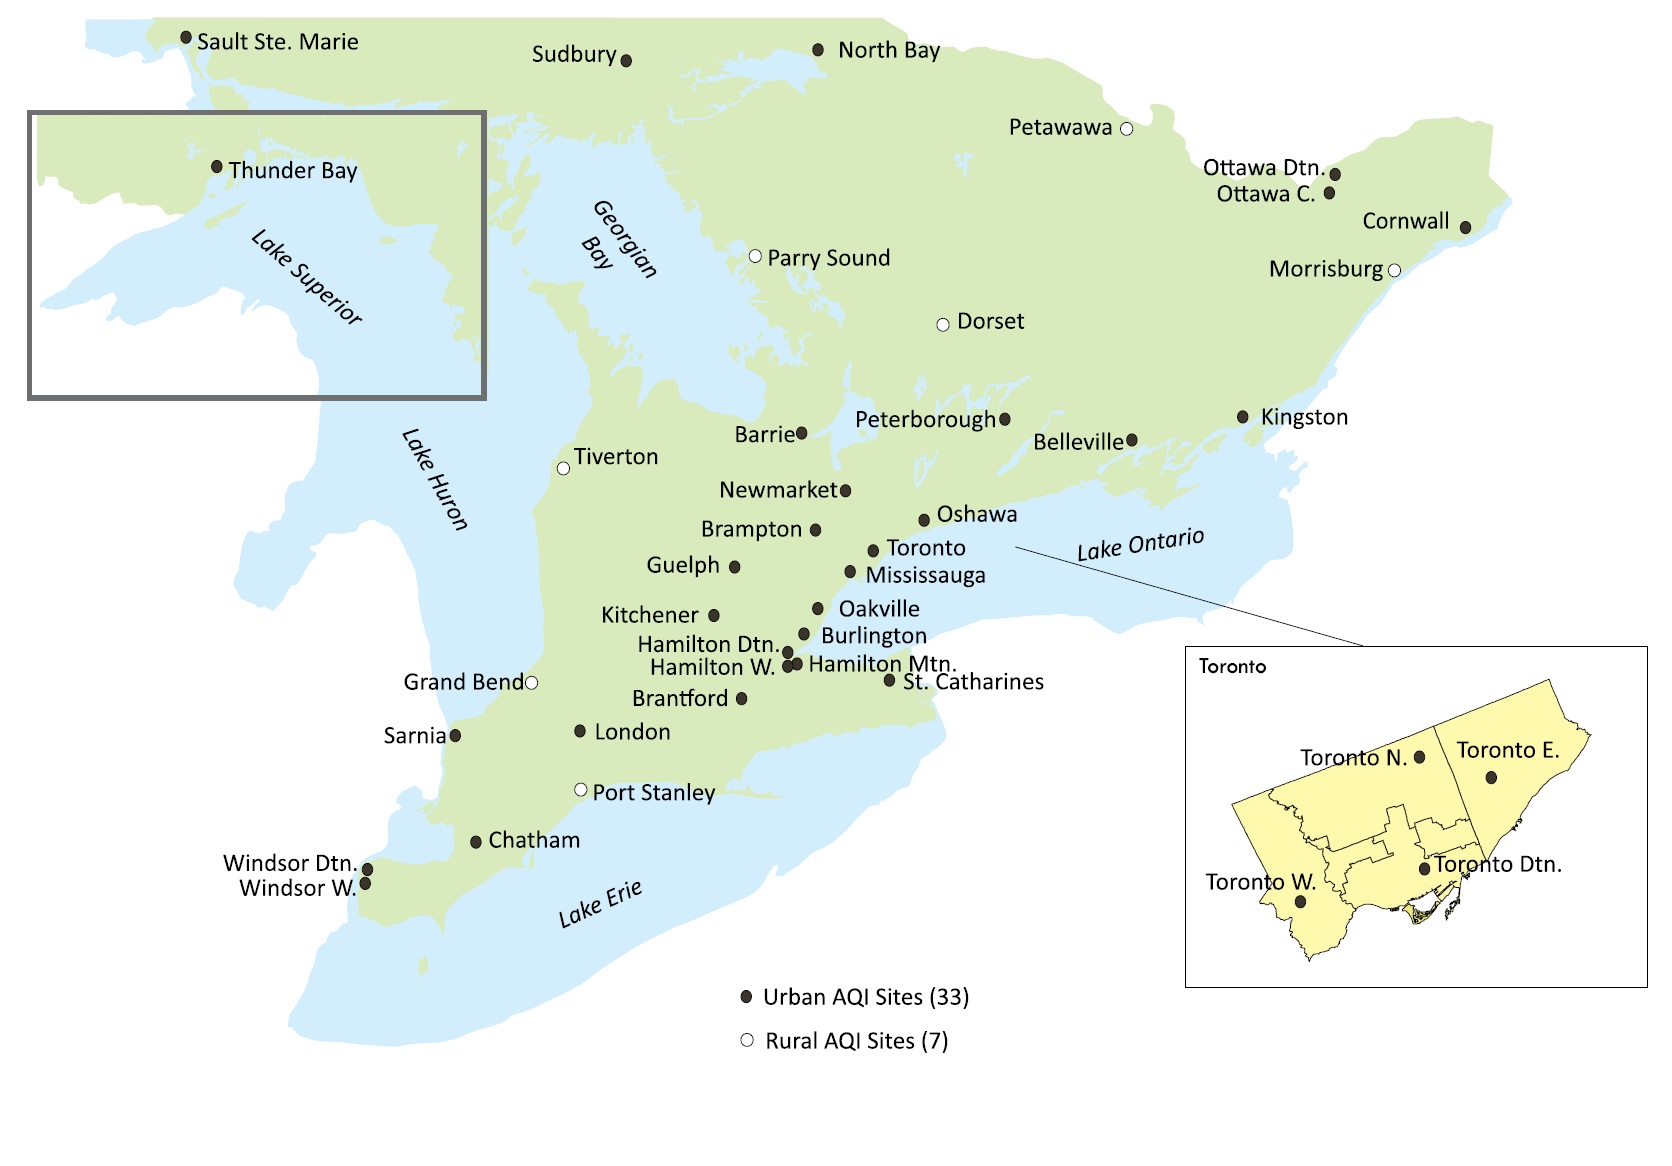 Map A1 is a map depicting the Air Quality Index monitoring sites across Ontario in 2013.